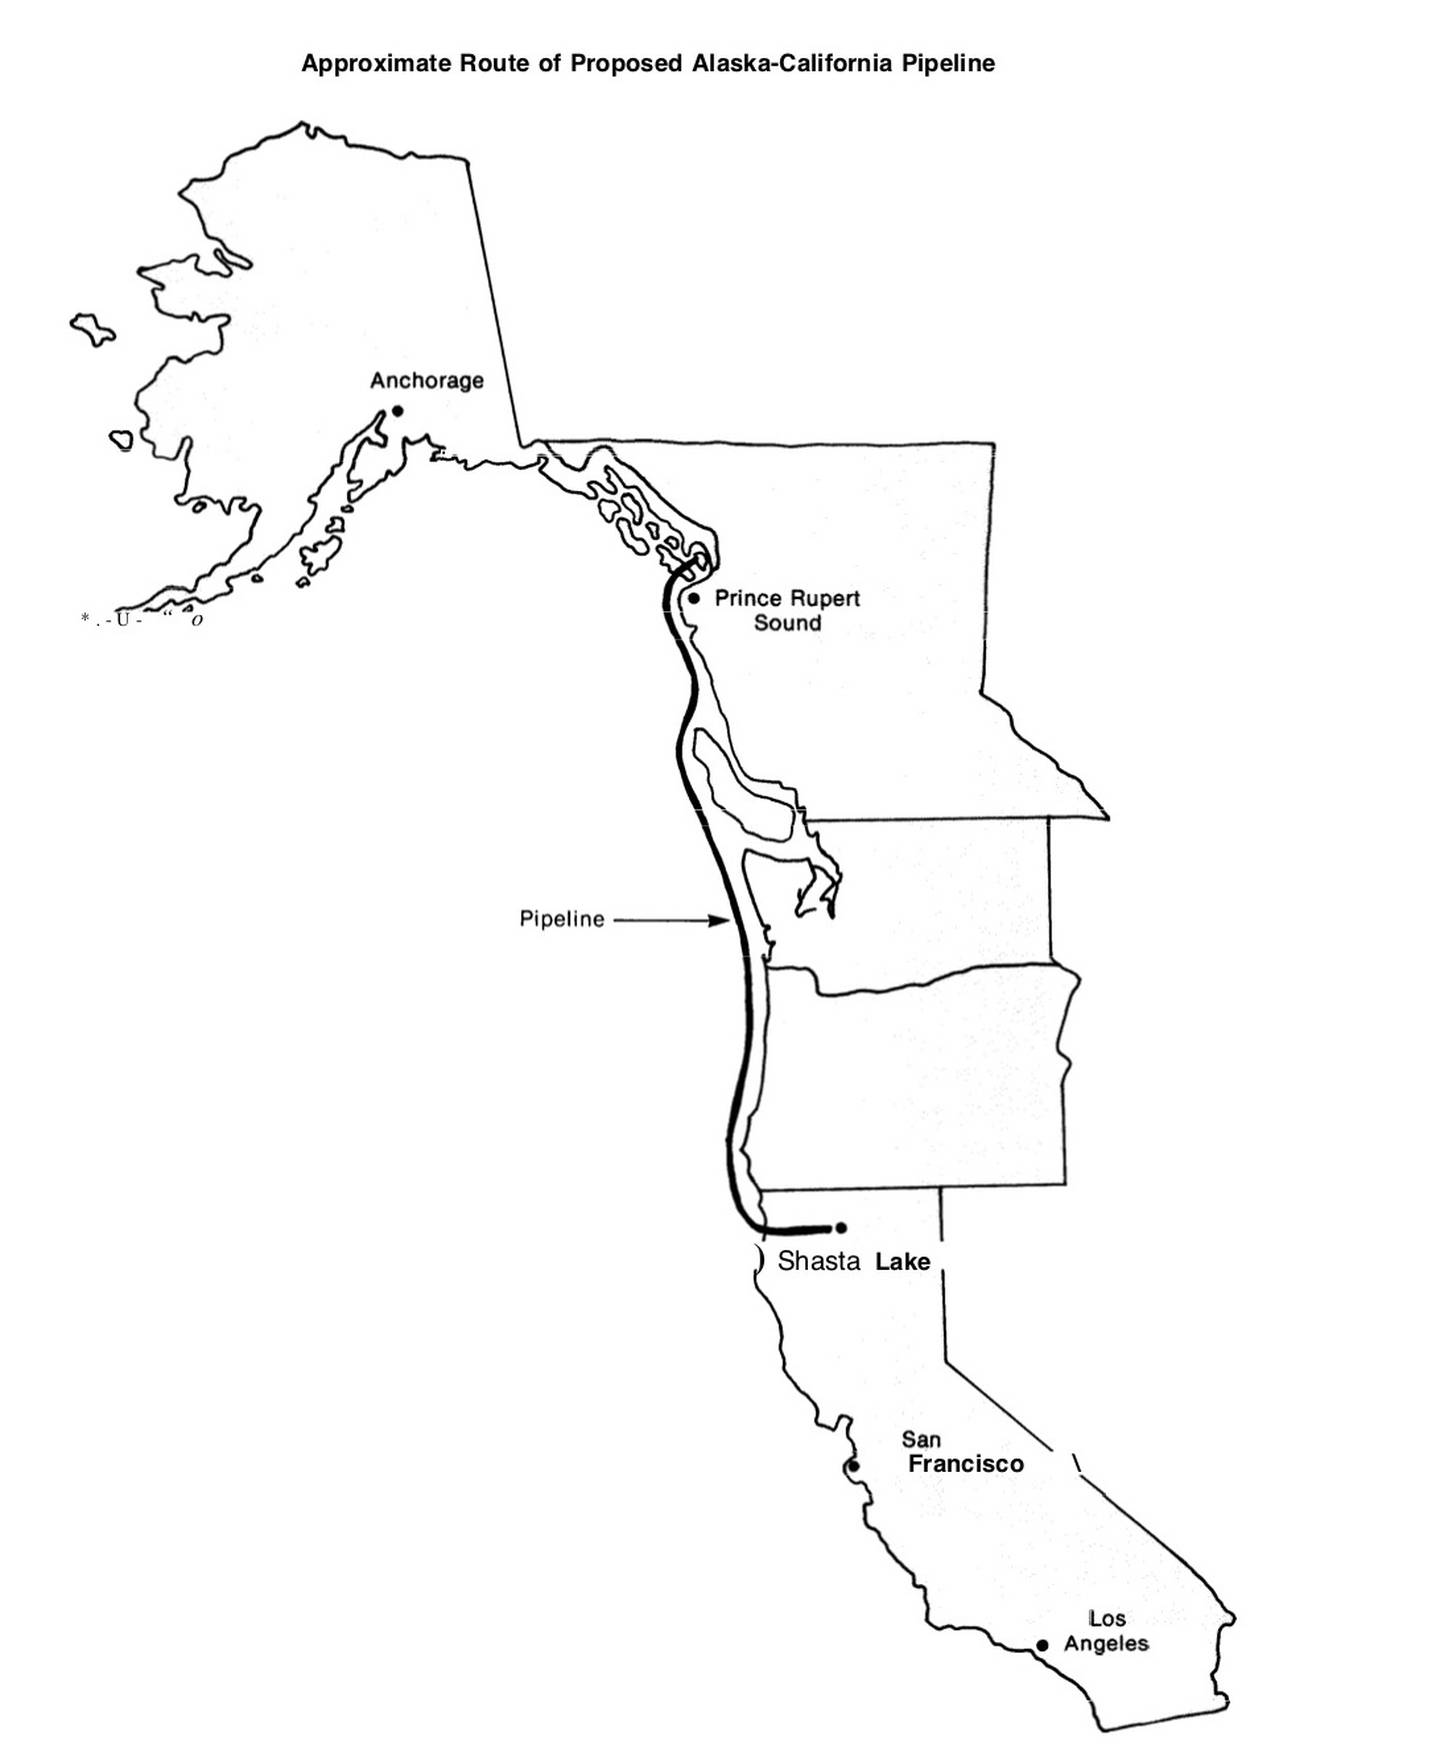 The 1992 proposed route of an undersea water pipeline from the Stikine River in Alaska to northern California.